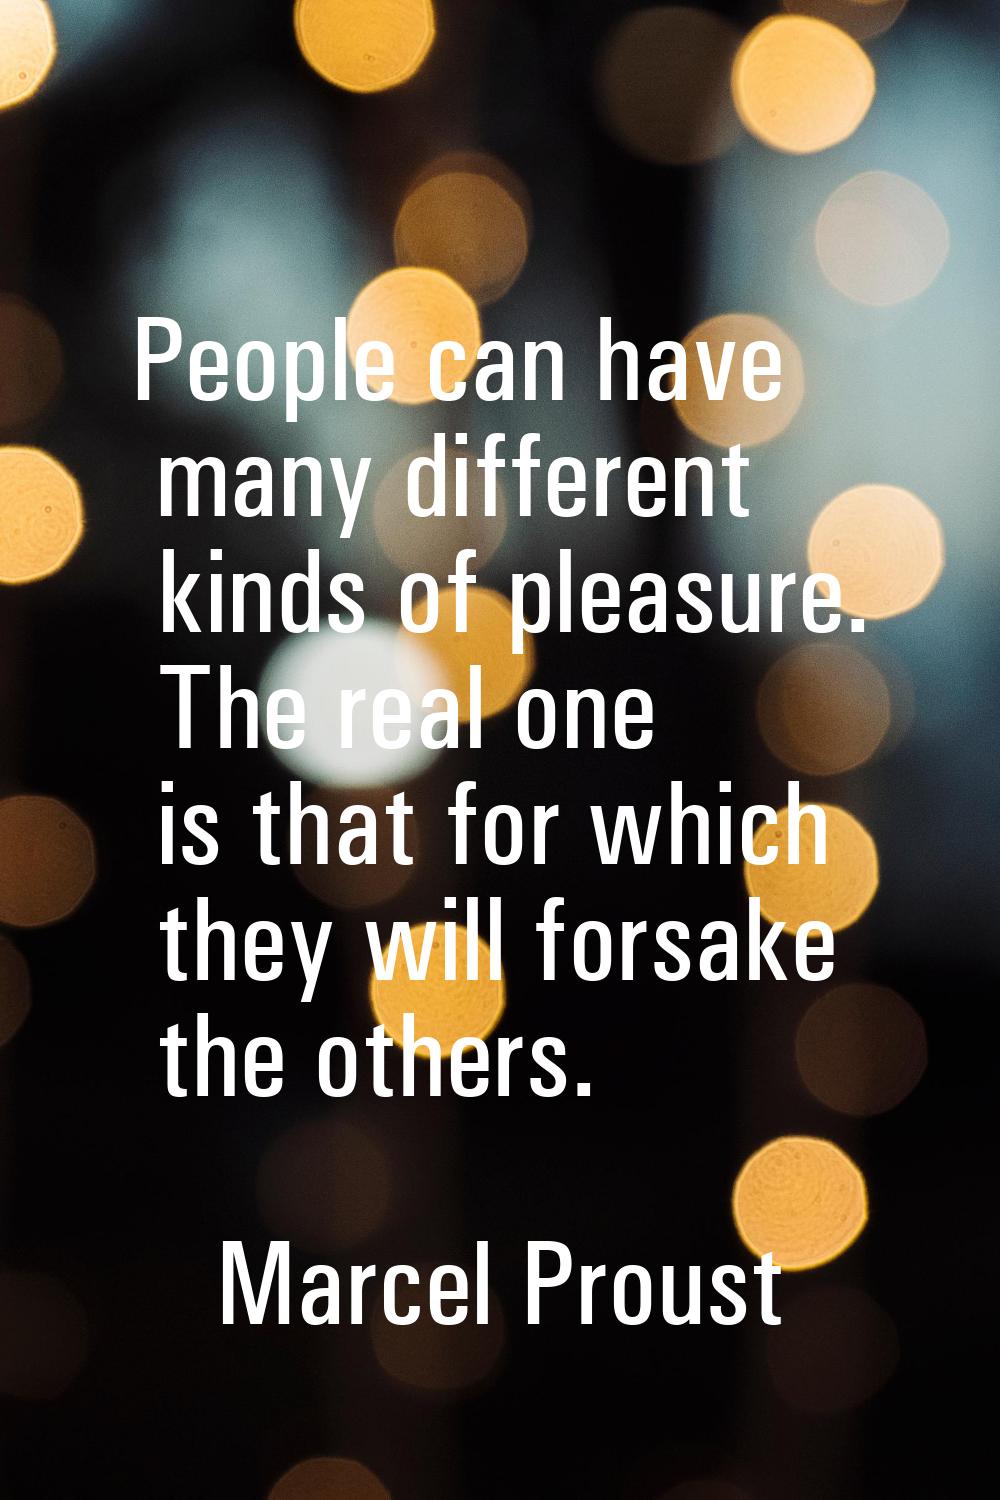 People can have many different kinds of pleasure. The real one is that for which they will forsake 